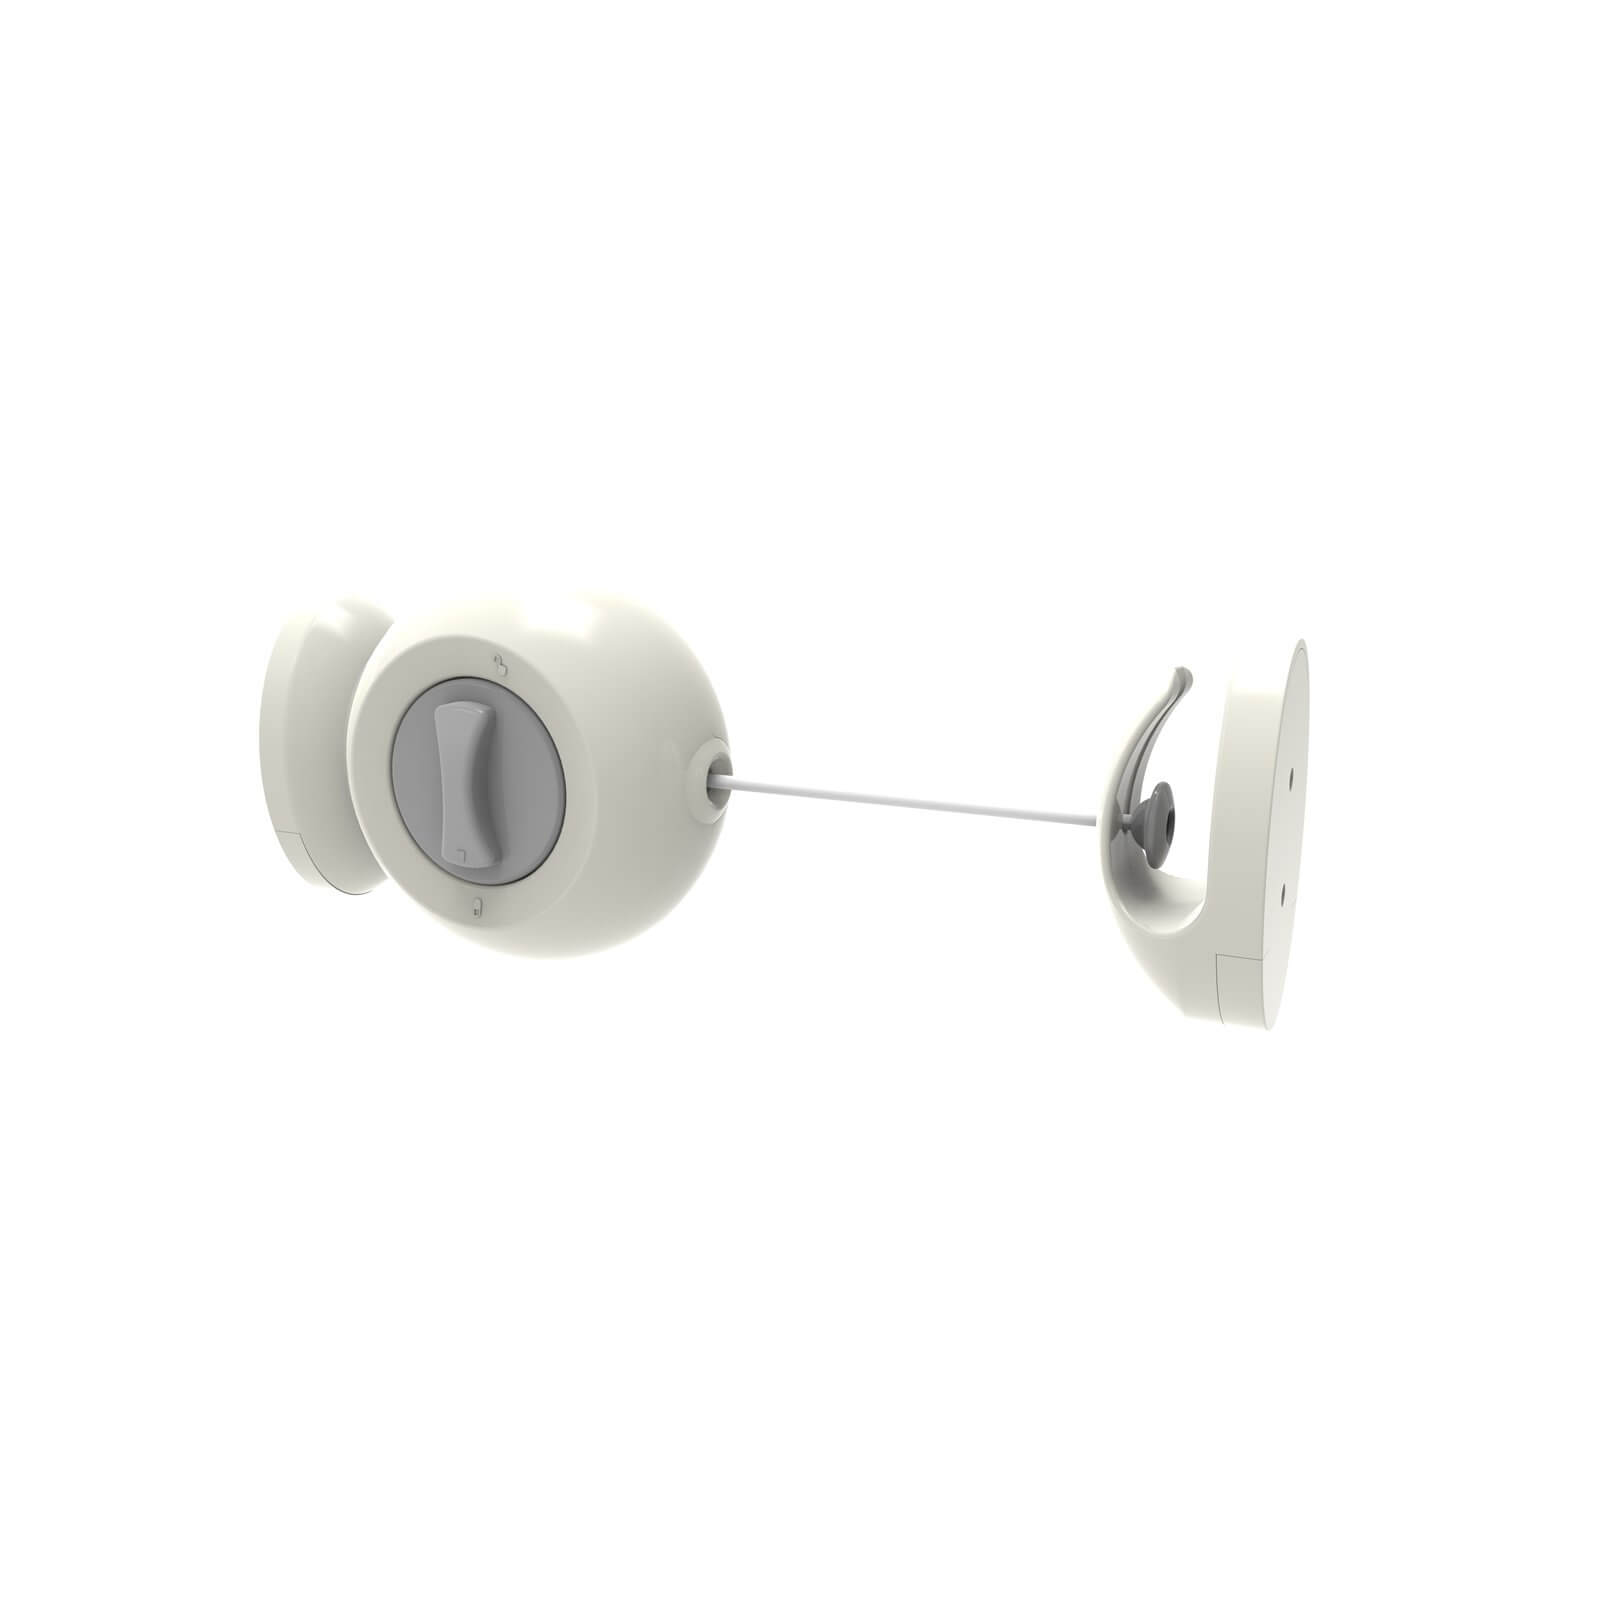 Photo of Rotaspin Indoor Retractable Line - 3.5m